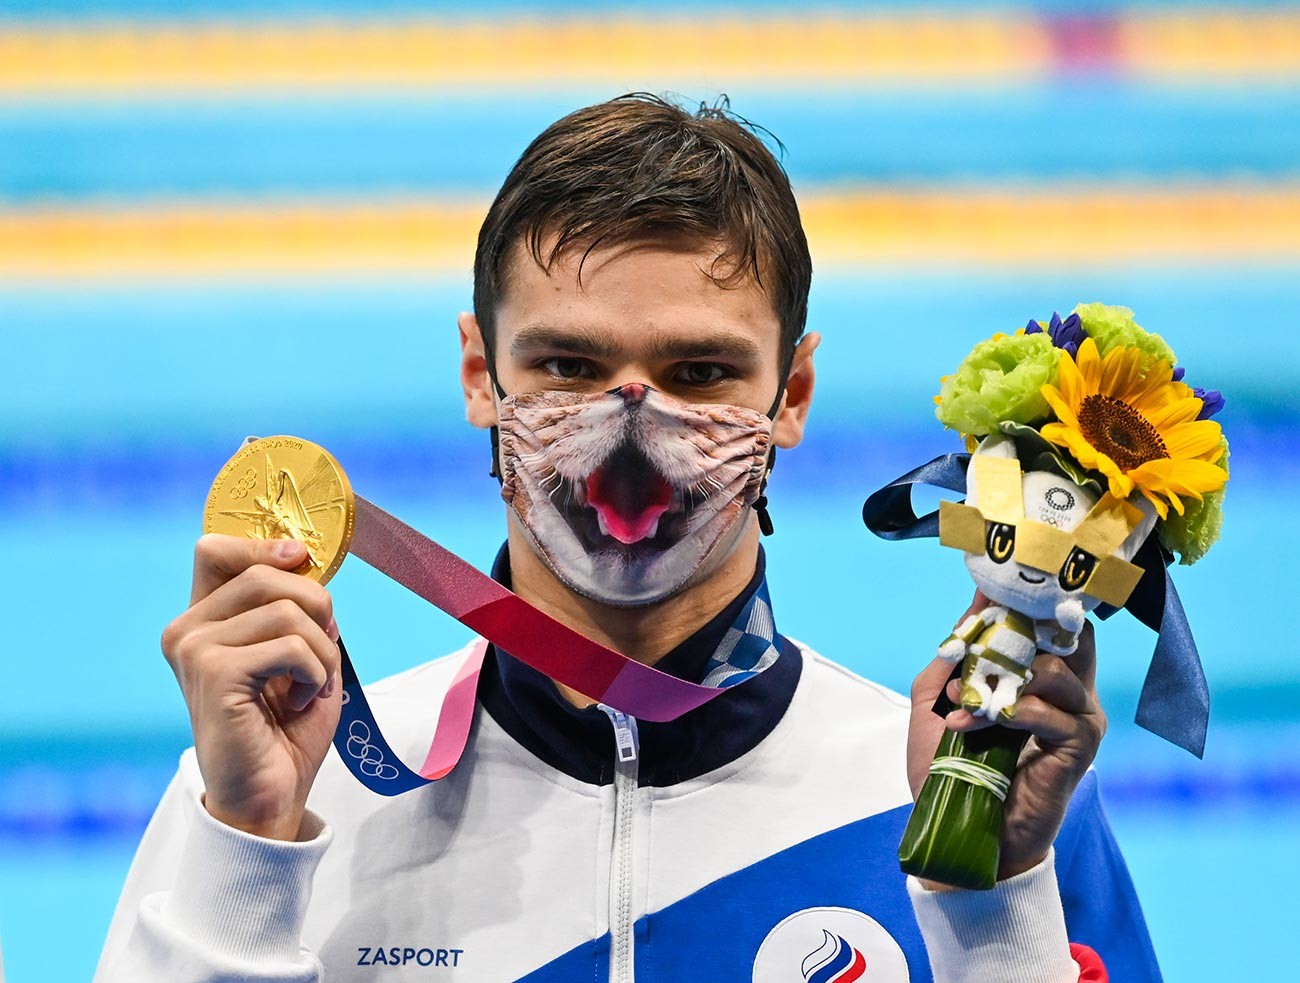 Evgeny Rylov of Team ROC poses with his gold medal for the Men's 200m Backstroke Final of swimming during the Tokyo 2020 Olympic Games at Tokyo Aquatics Centre in Tokyo, Japan on July 30, 2021